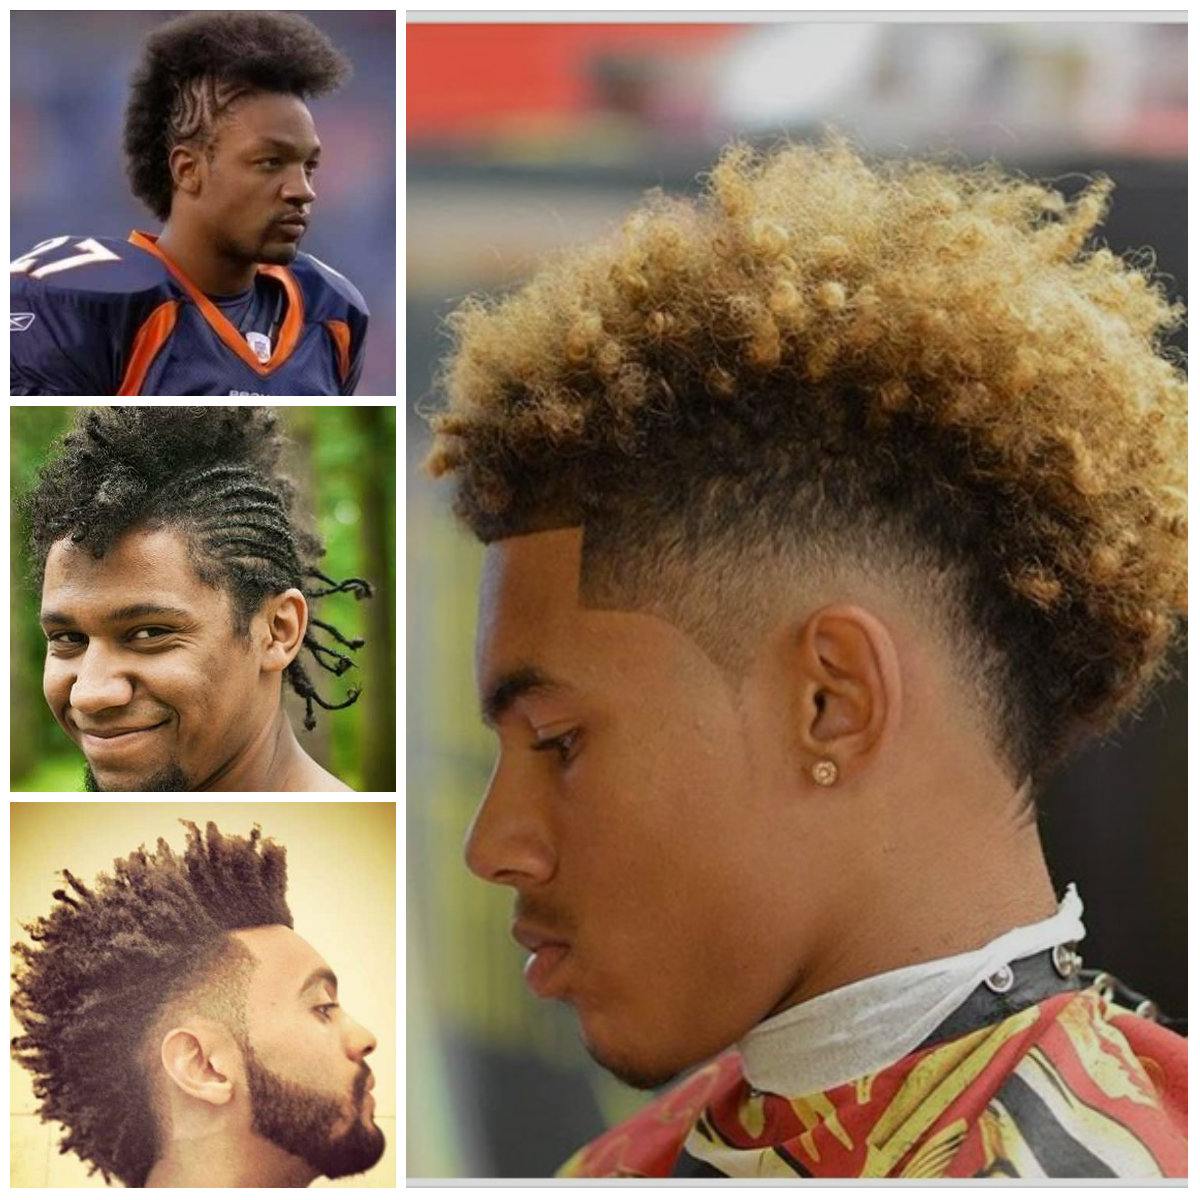 25 Best Hairstyles for College Guys to Try This Year